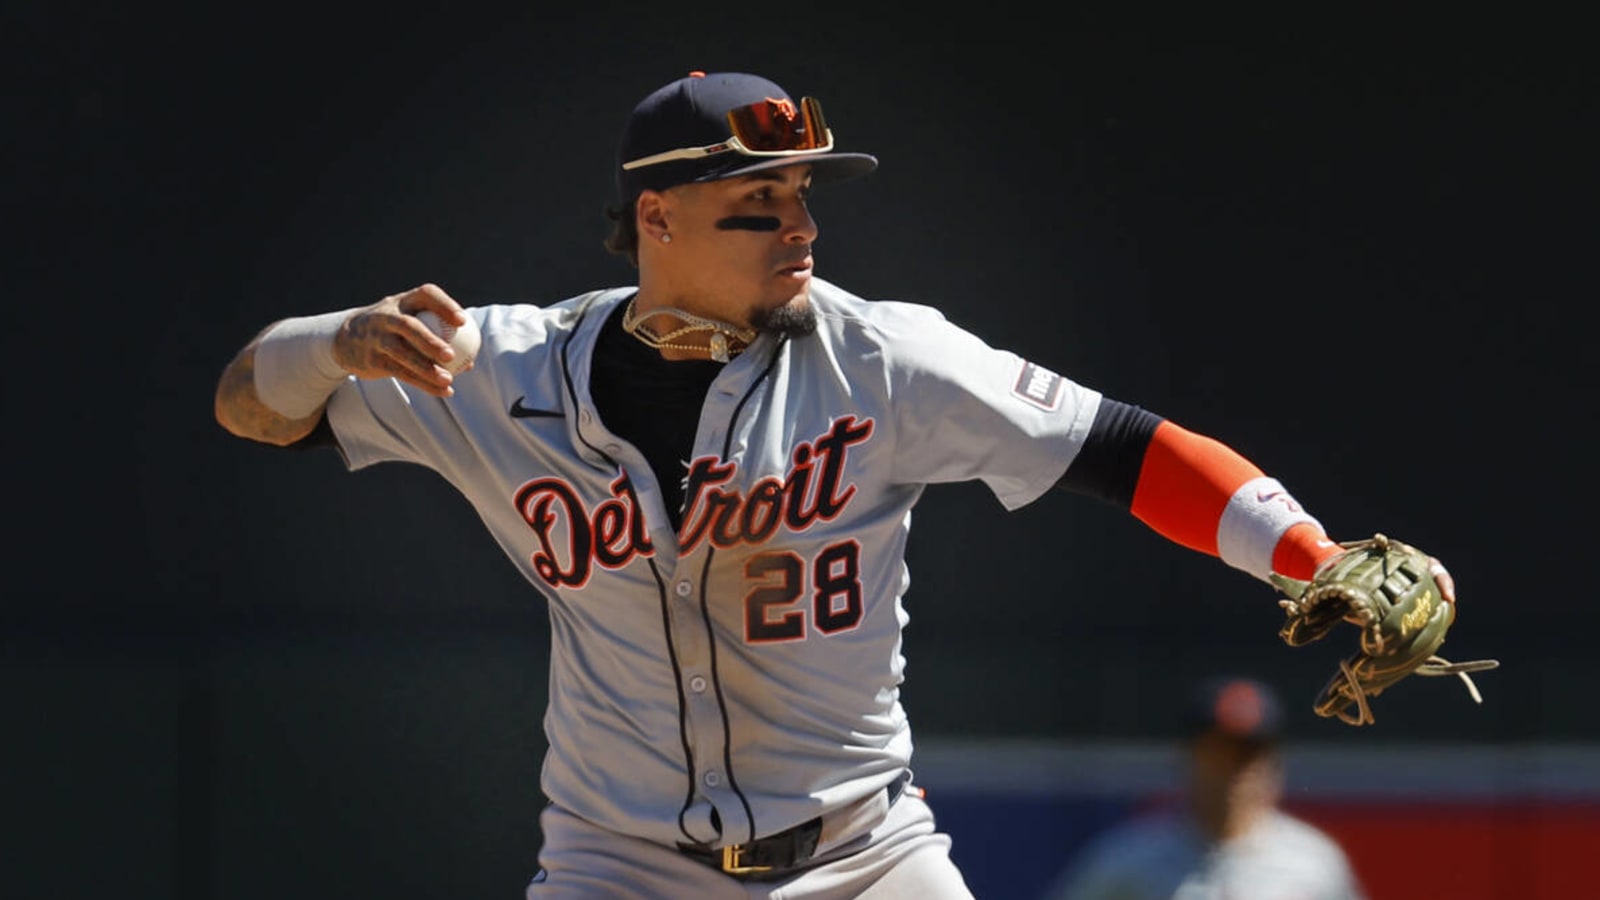 Javier Baez still being on Tigers an indictment against owner